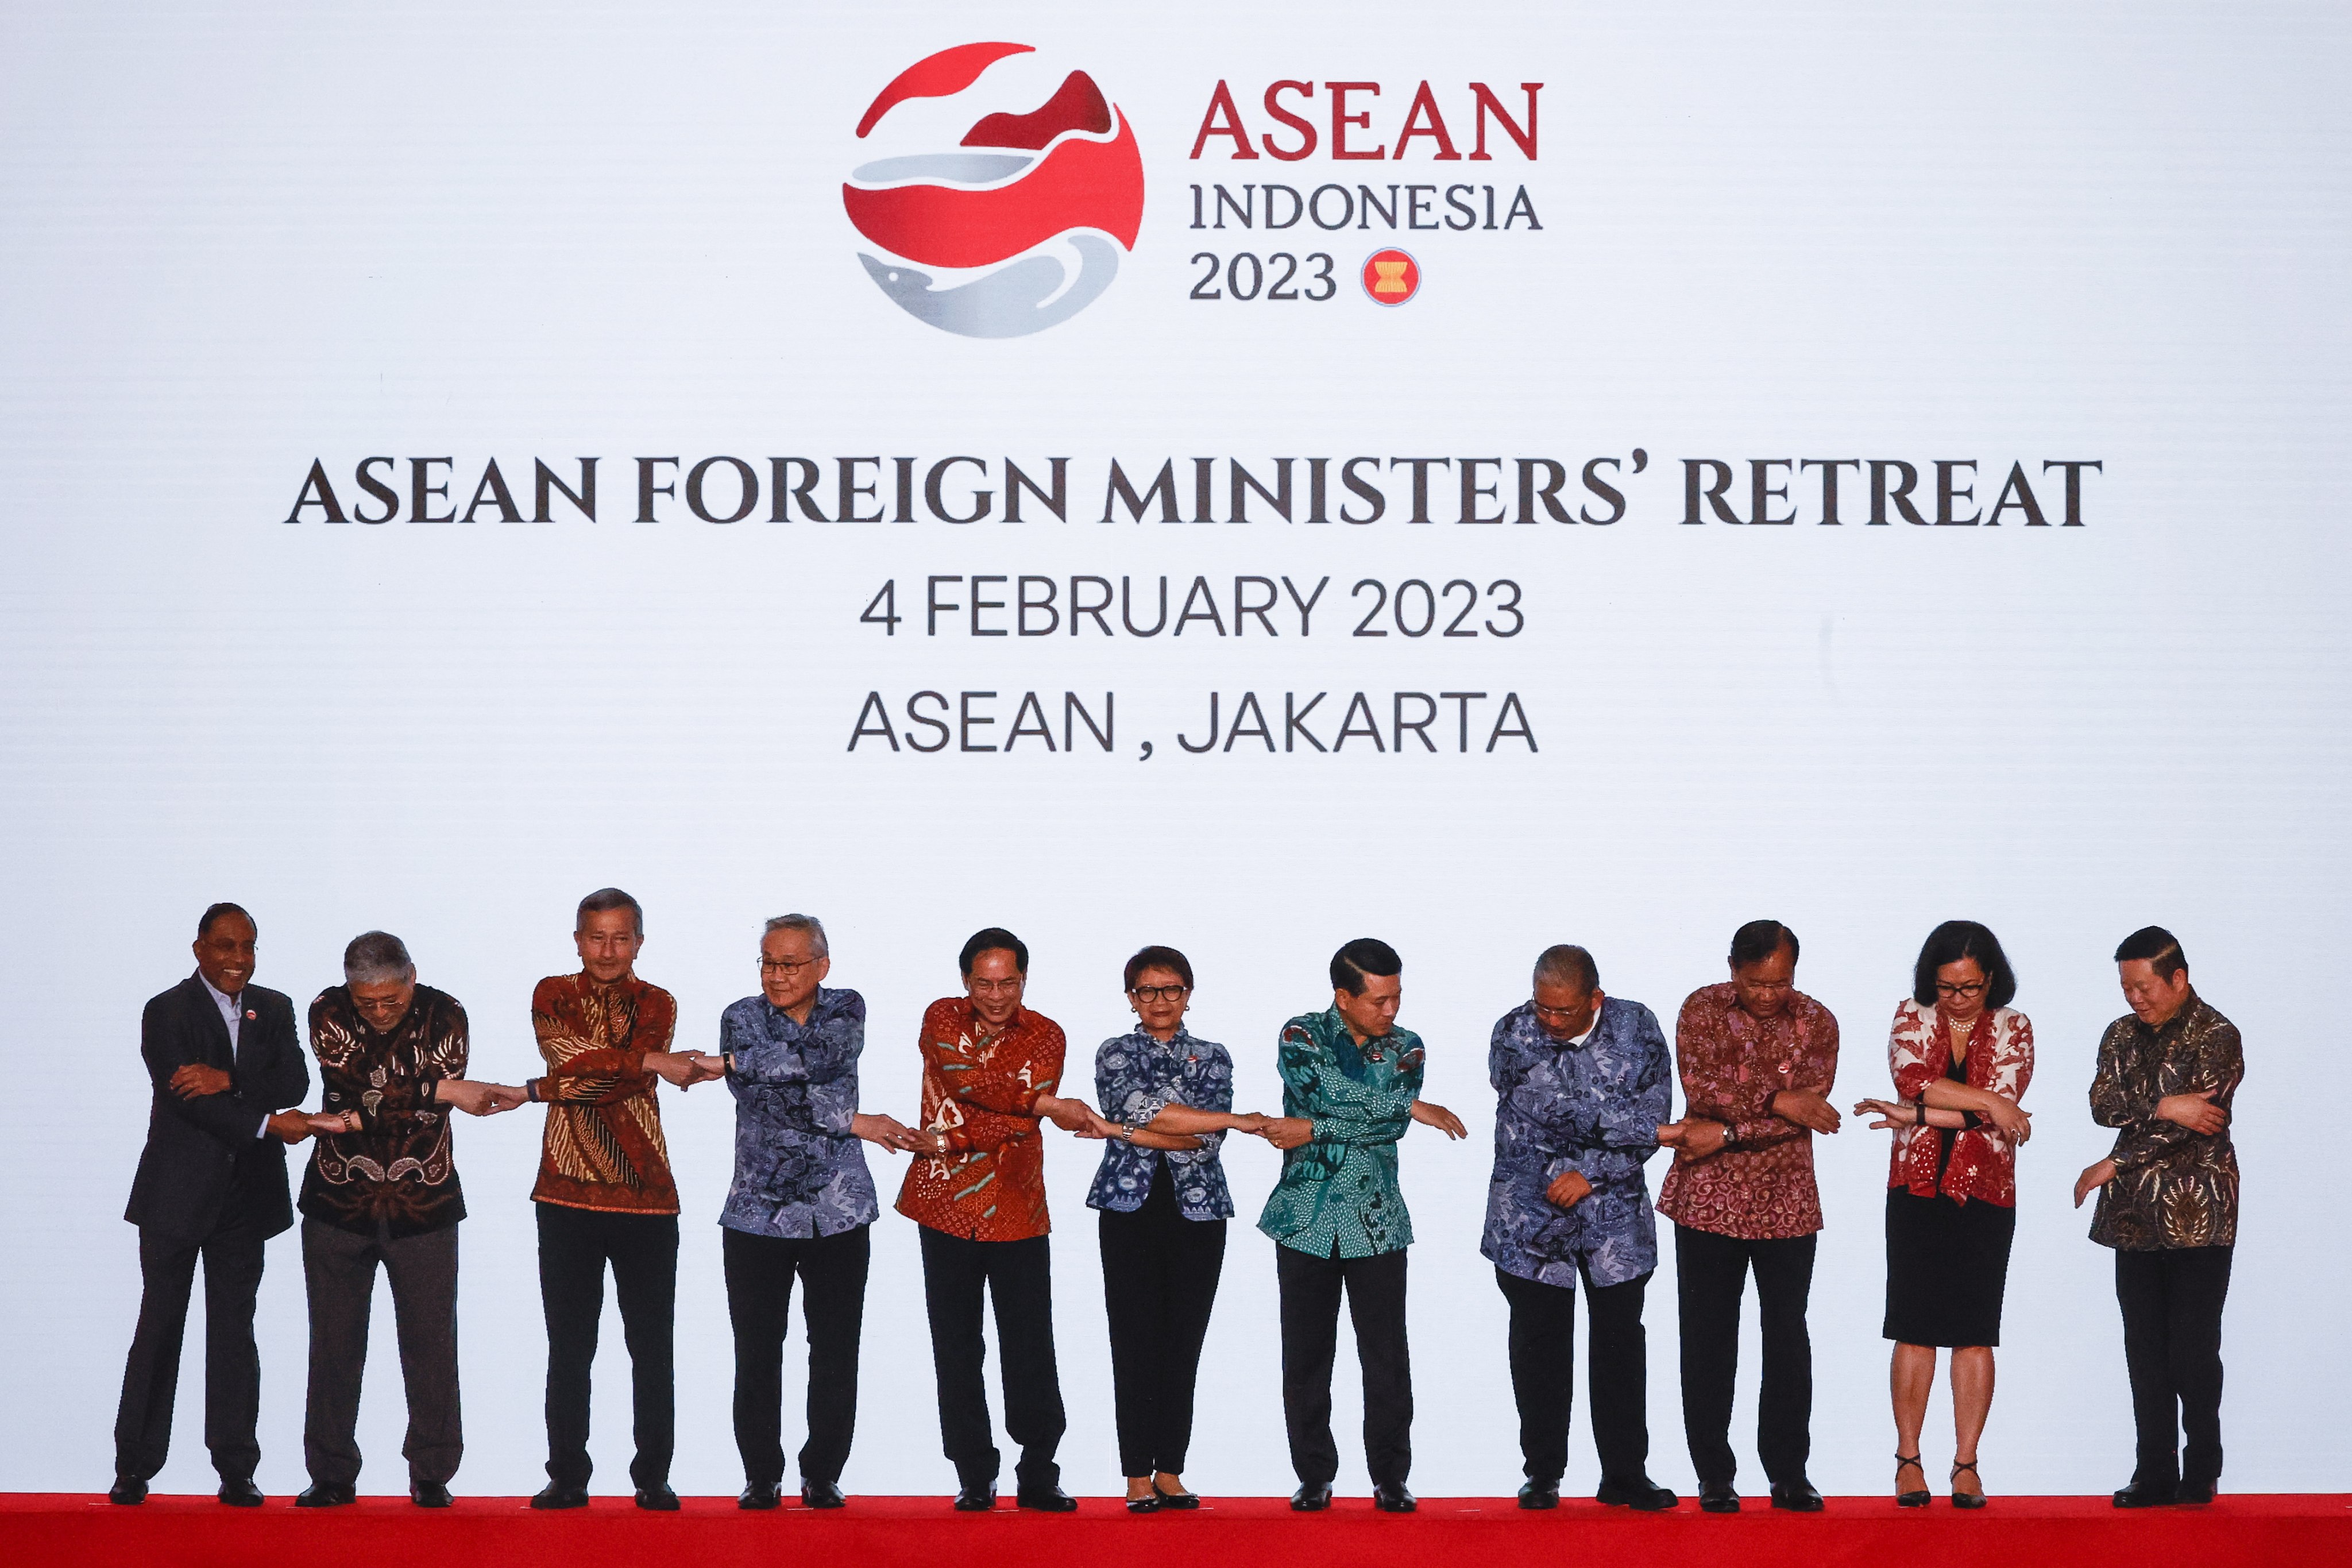 Asean foreign ministers pose for a “family” photo during a retreat in Jakarta, Indonesia, on February 4. Photo: EPA-EFE